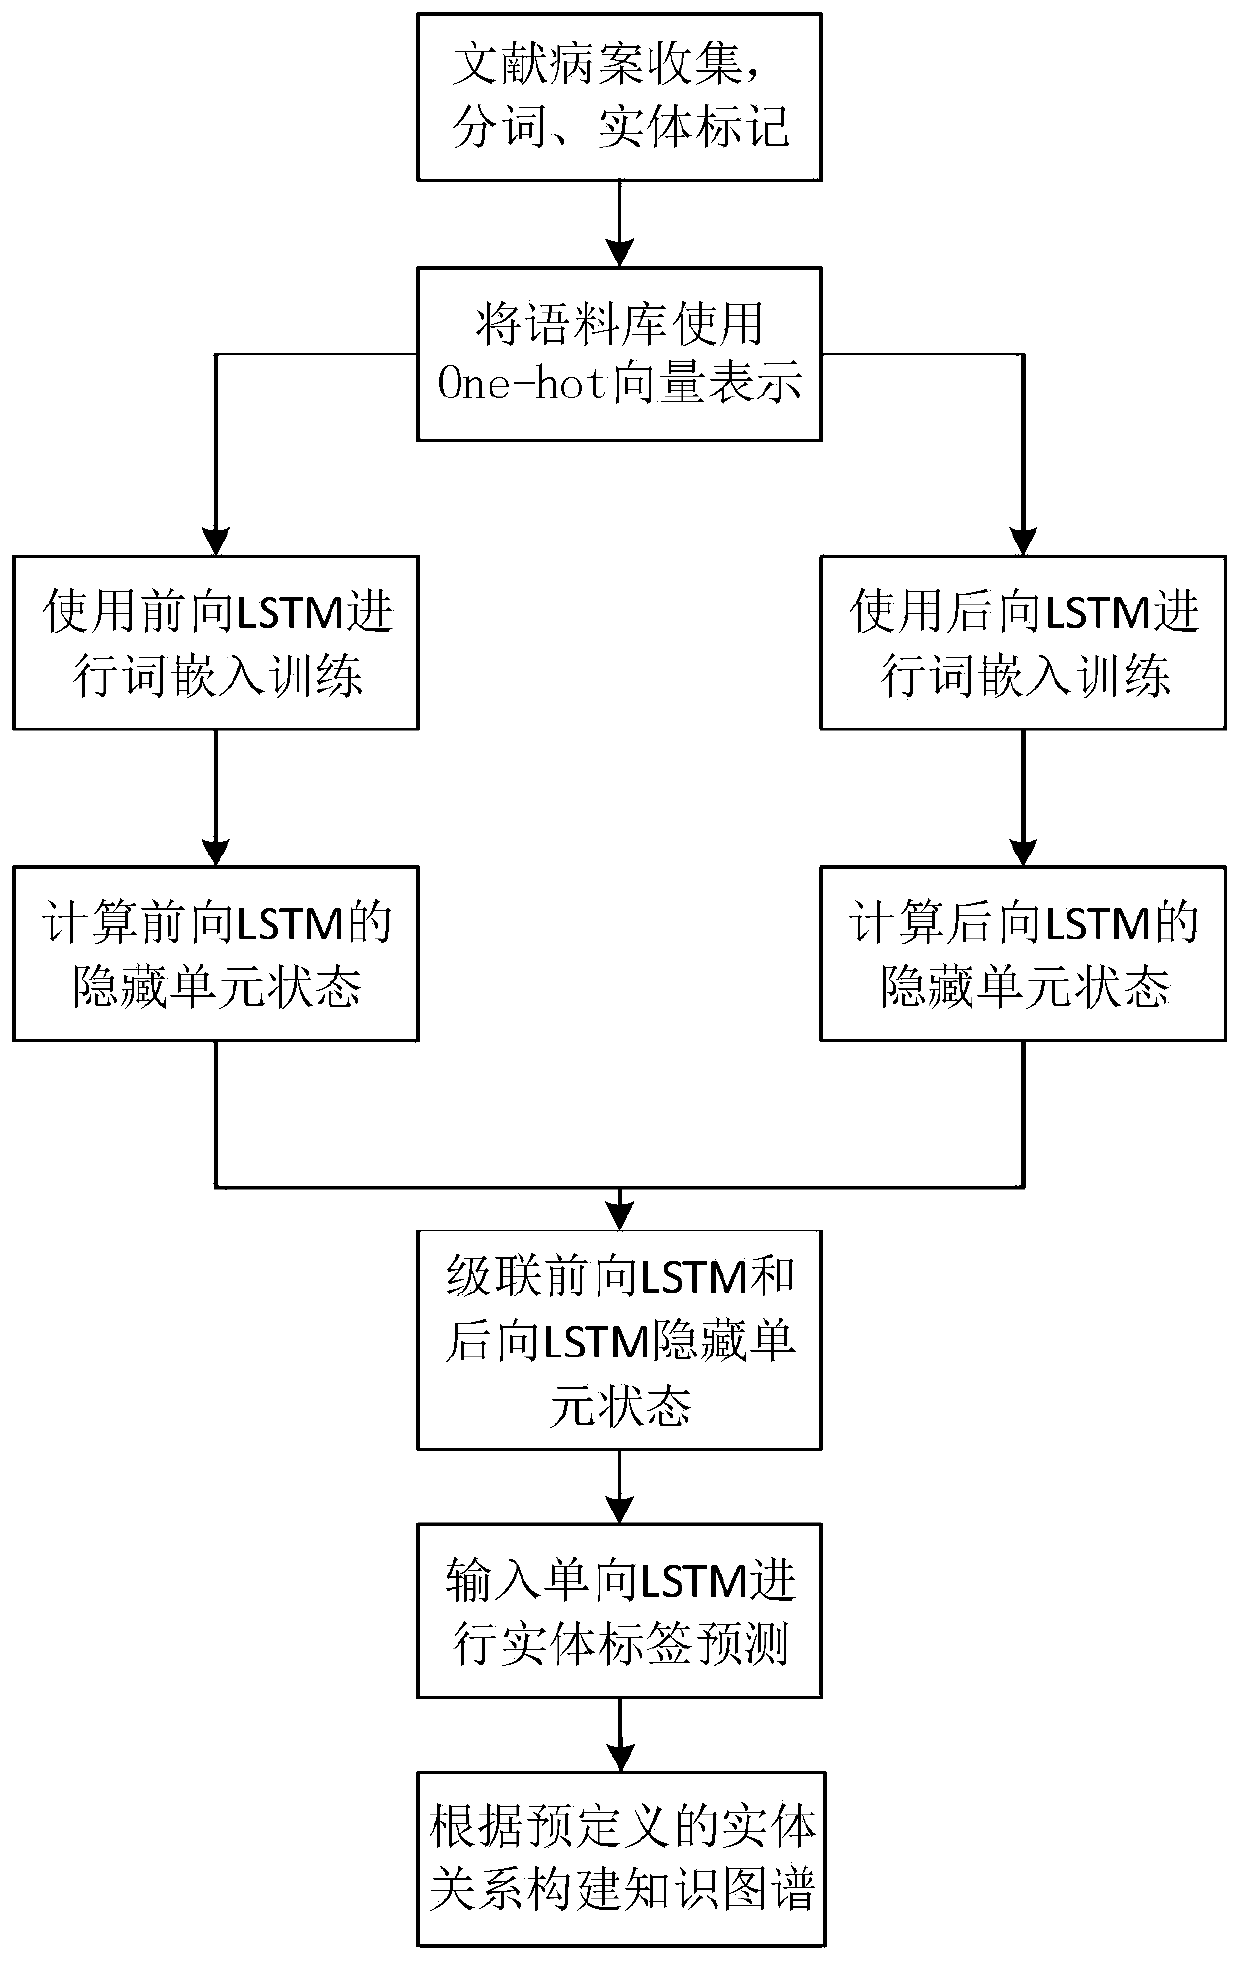 Traditional Chinese medicine diagnosis and treatment knowledge graph automatic construction method based on deep learning